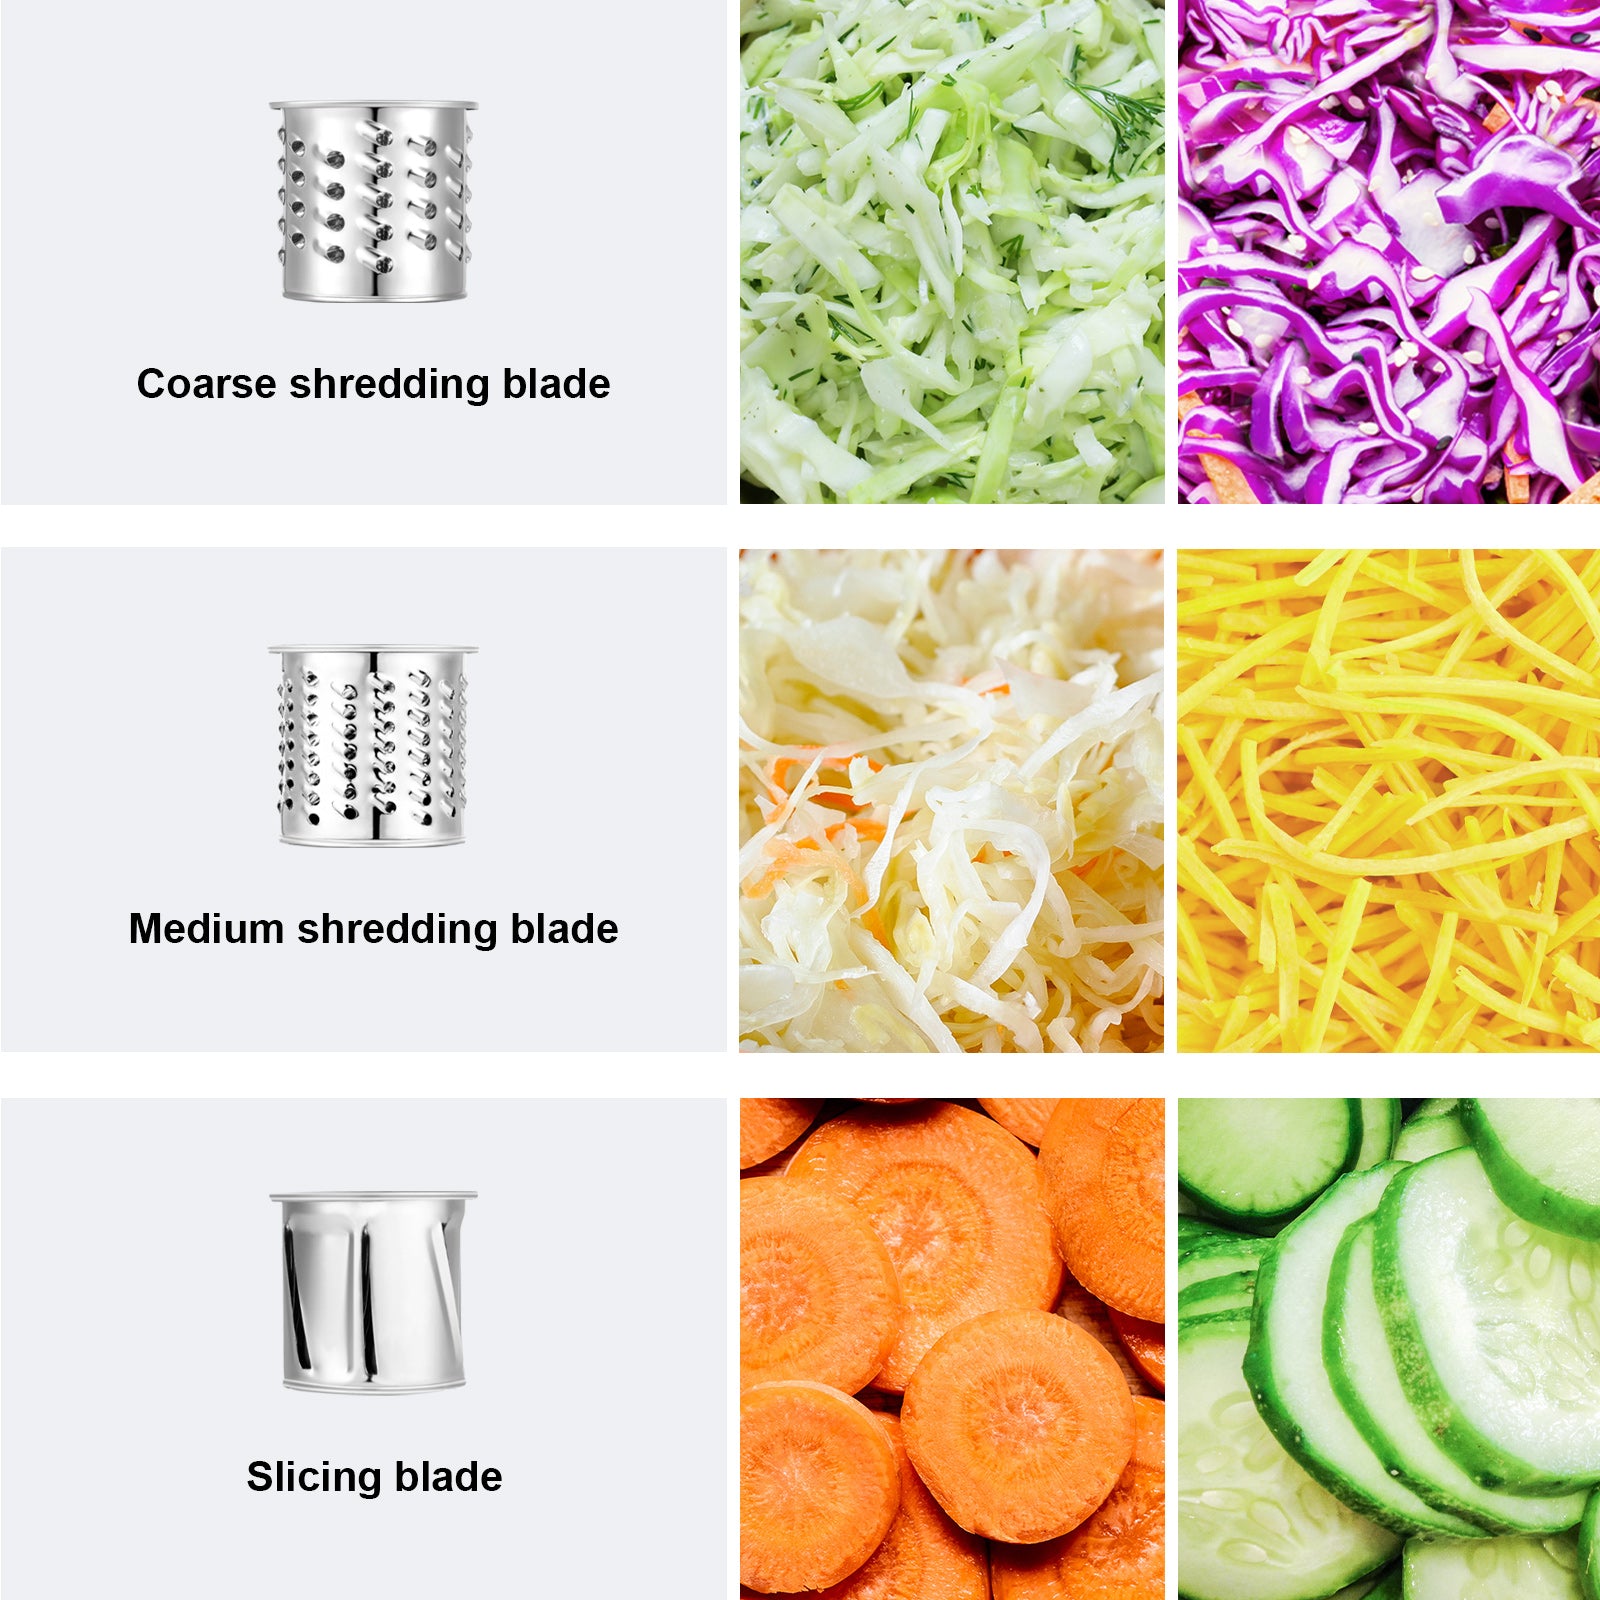 Mixer accessories Vegetable Slicer/Shredder/Cheese Grater Fit For